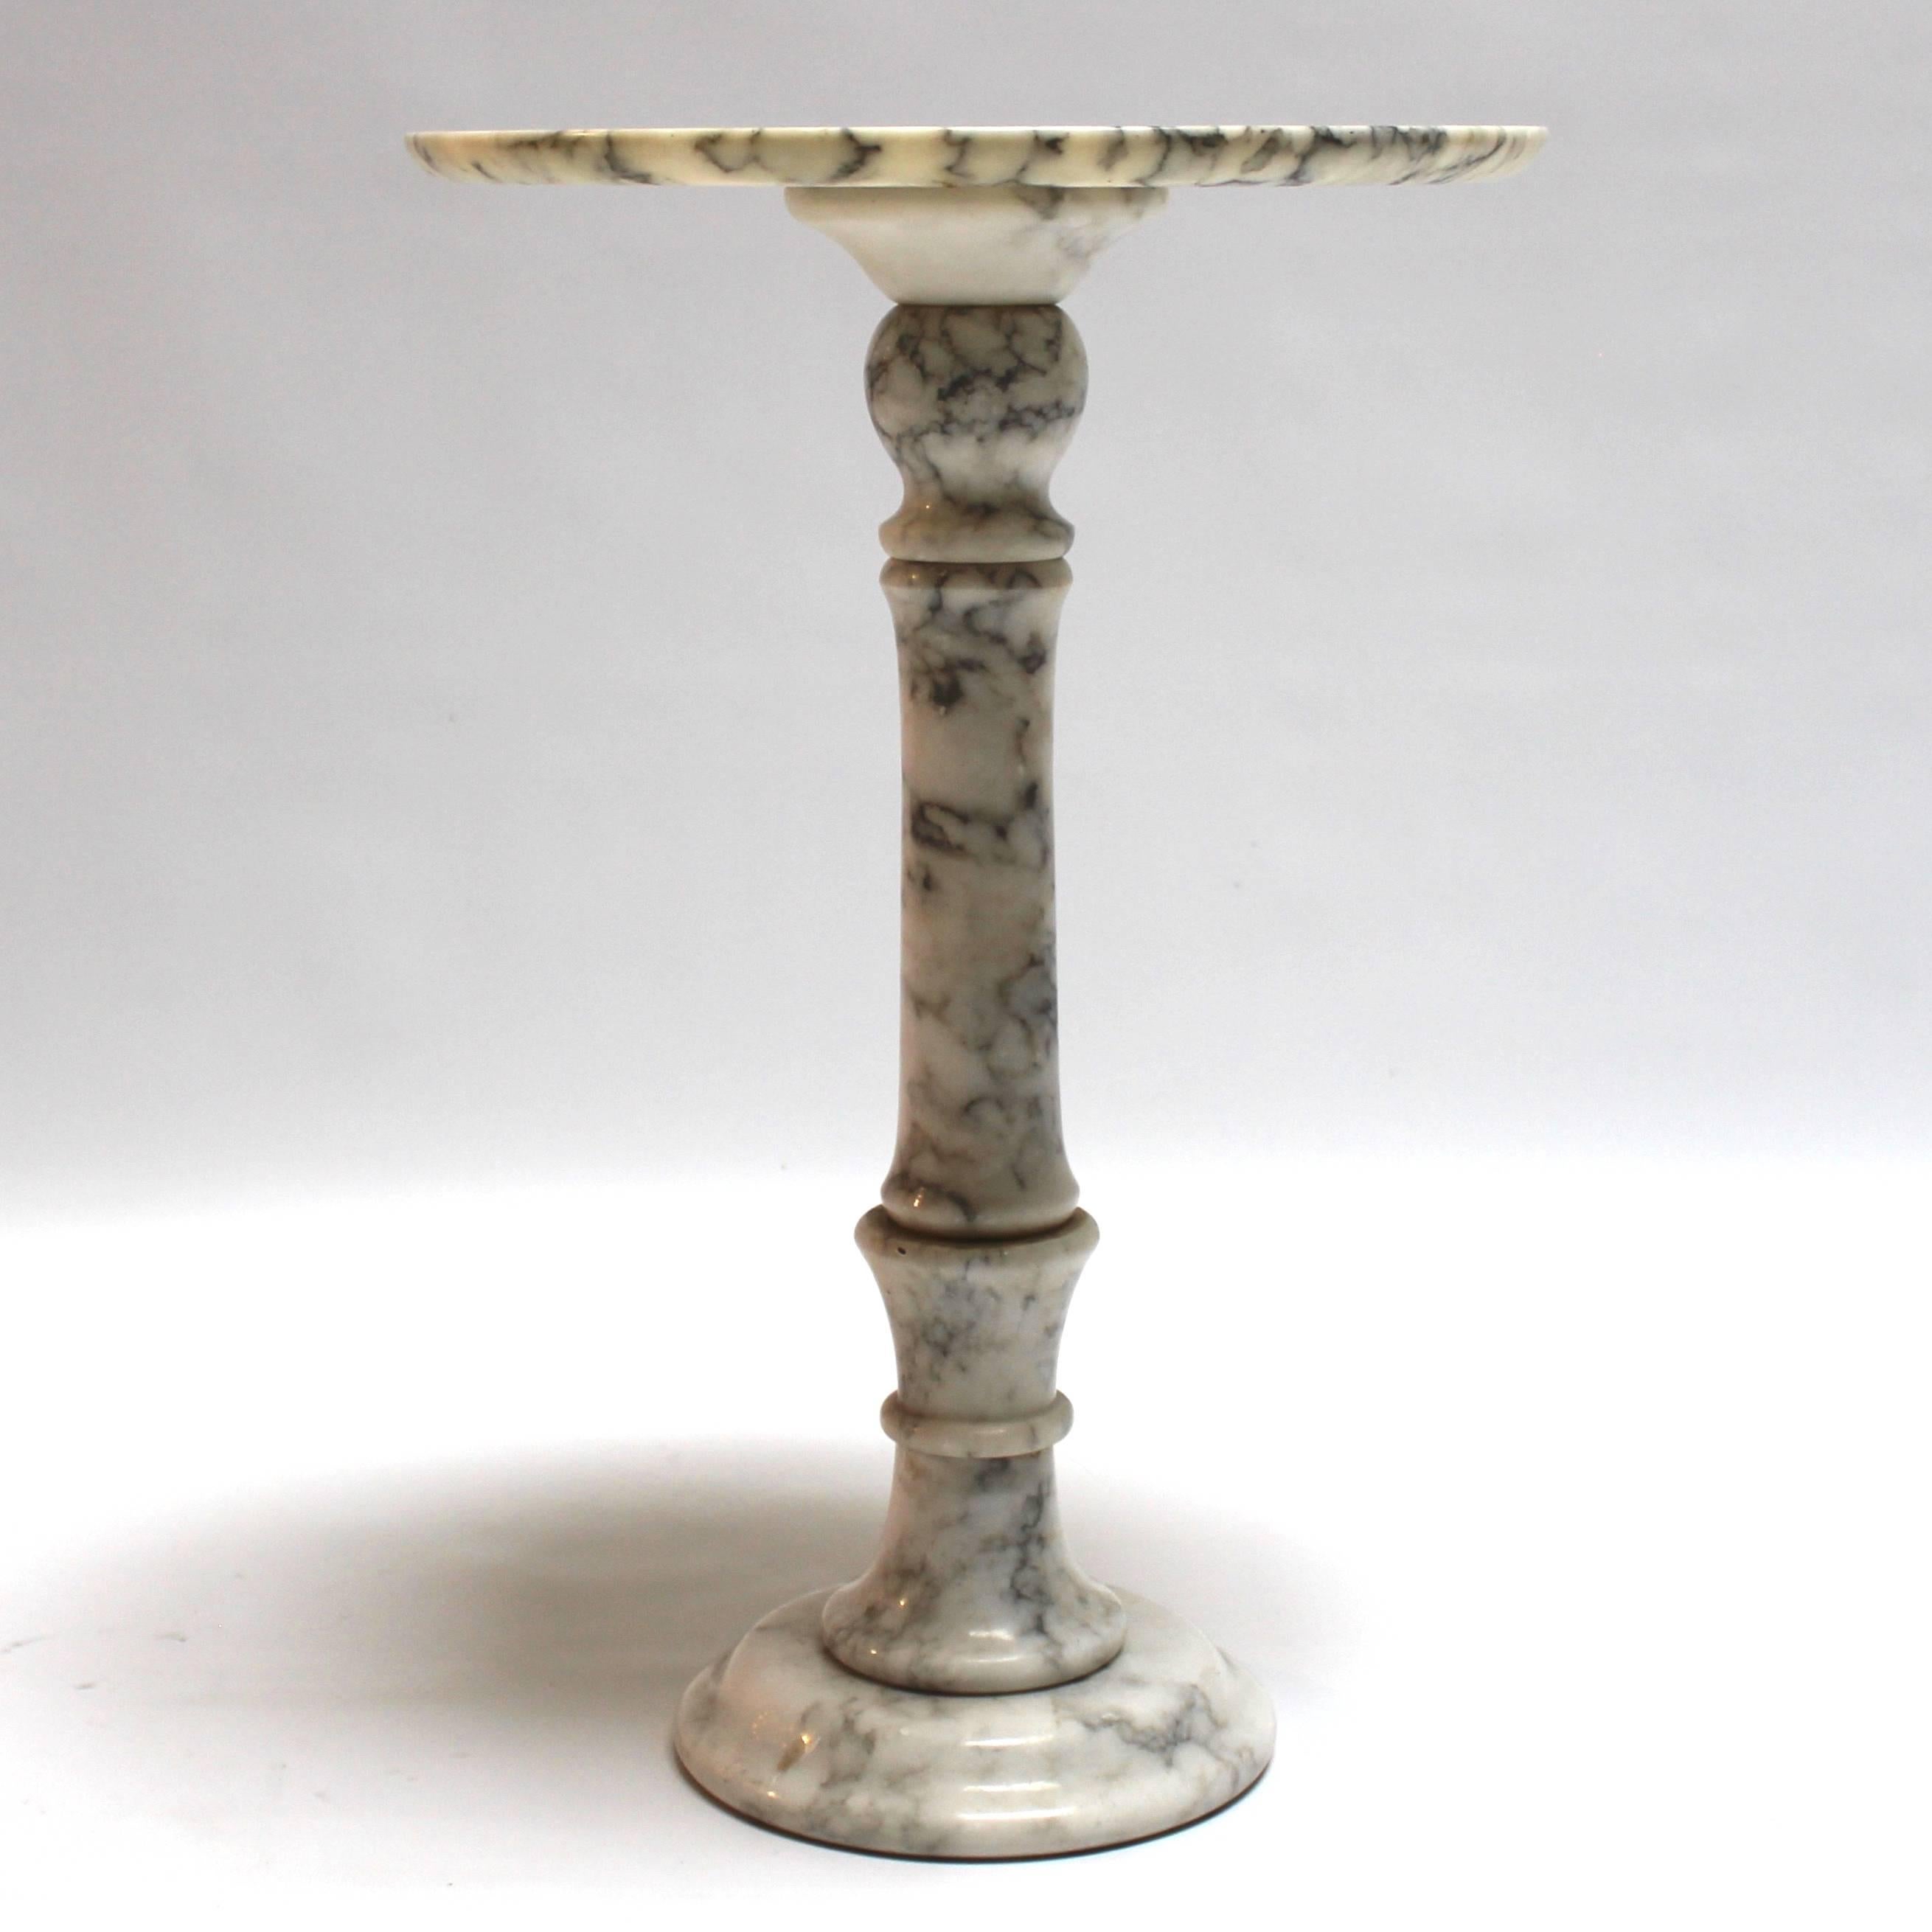 Vintage Carrara marble round side table or plant stand, made in Italy. With a delicate sculptural pedestal base, the table is an ideal transitional piece, mixing well with modern, traditional, or contemporary pieces.